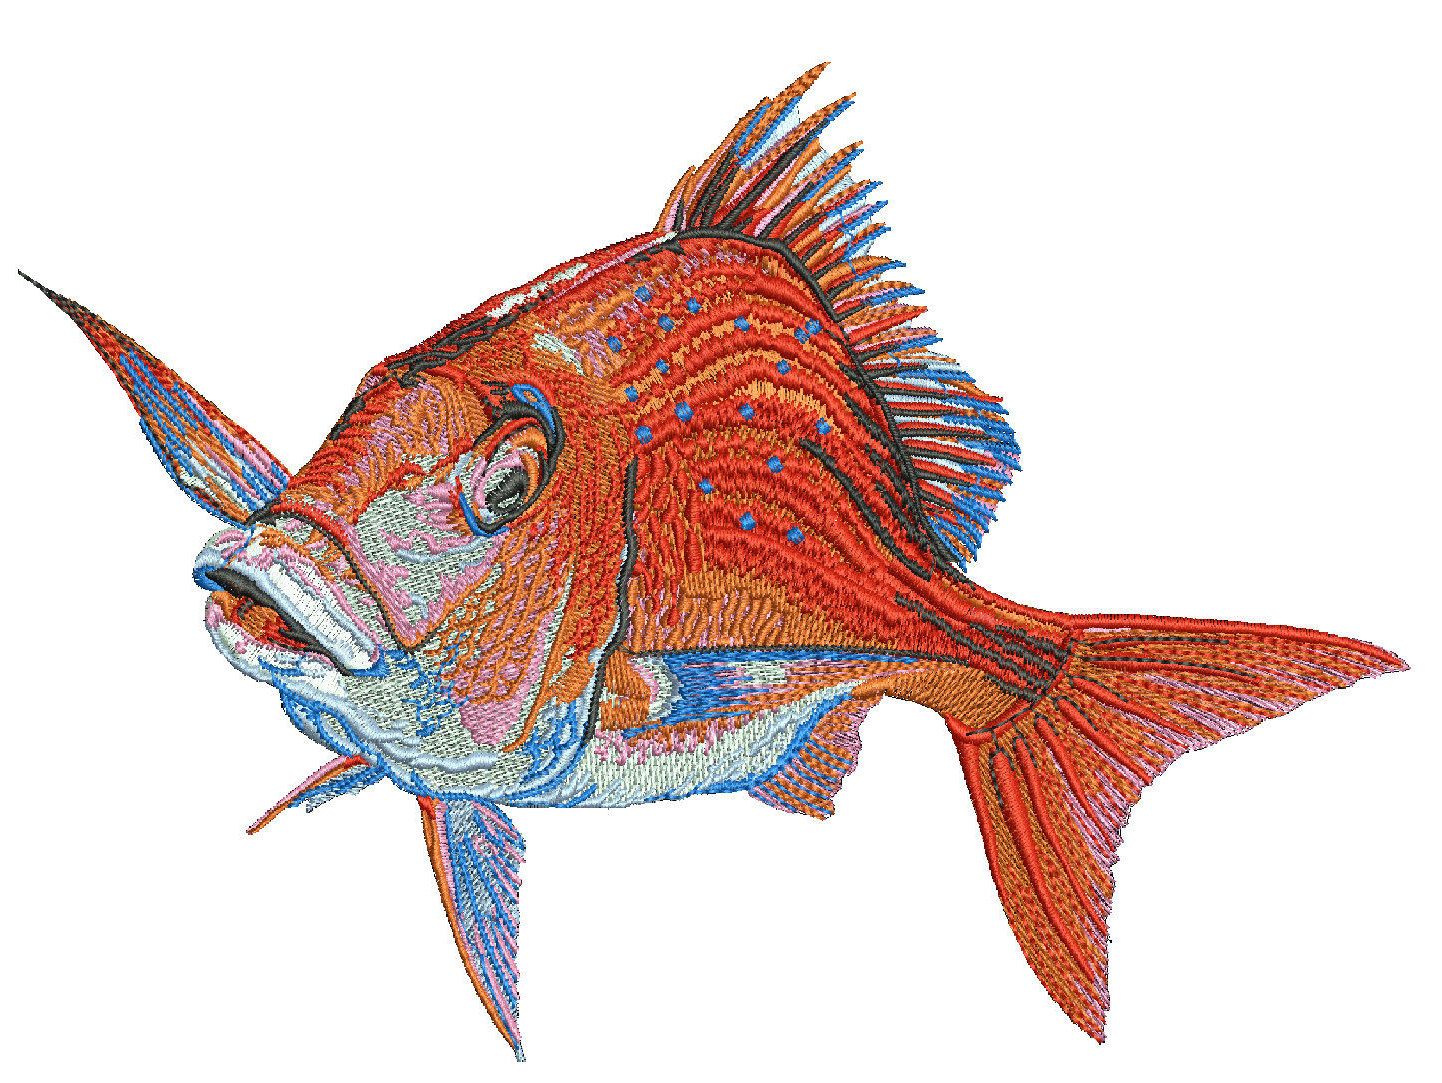 Fish Embroidery Patterns Bass Fish Embroidery Design Machine File Embroidery Designs Pes Files Embroidery Patterns Designs Mini Embroidery